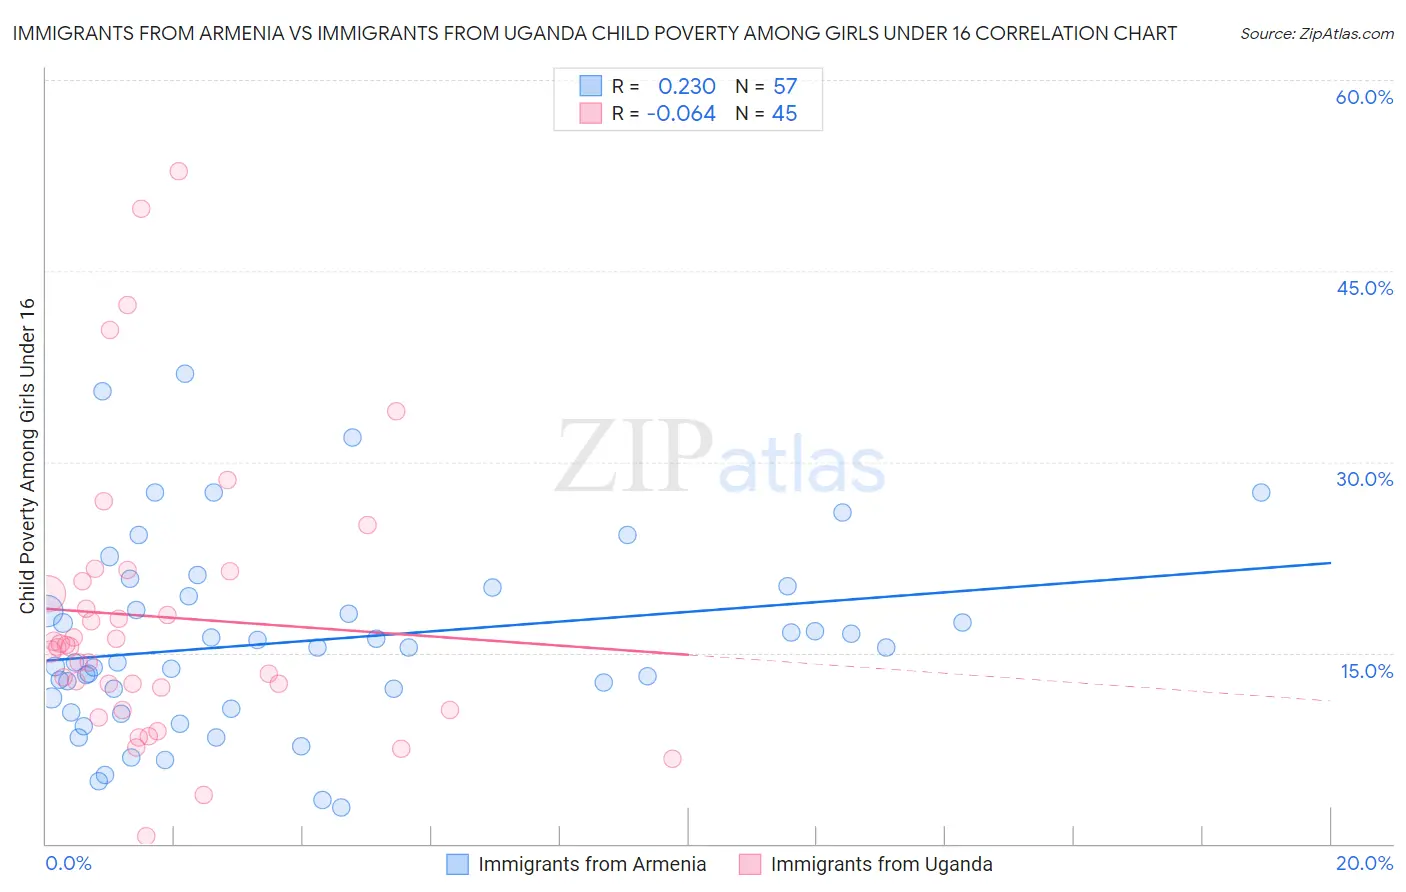 Immigrants from Armenia vs Immigrants from Uganda Child Poverty Among Girls Under 16